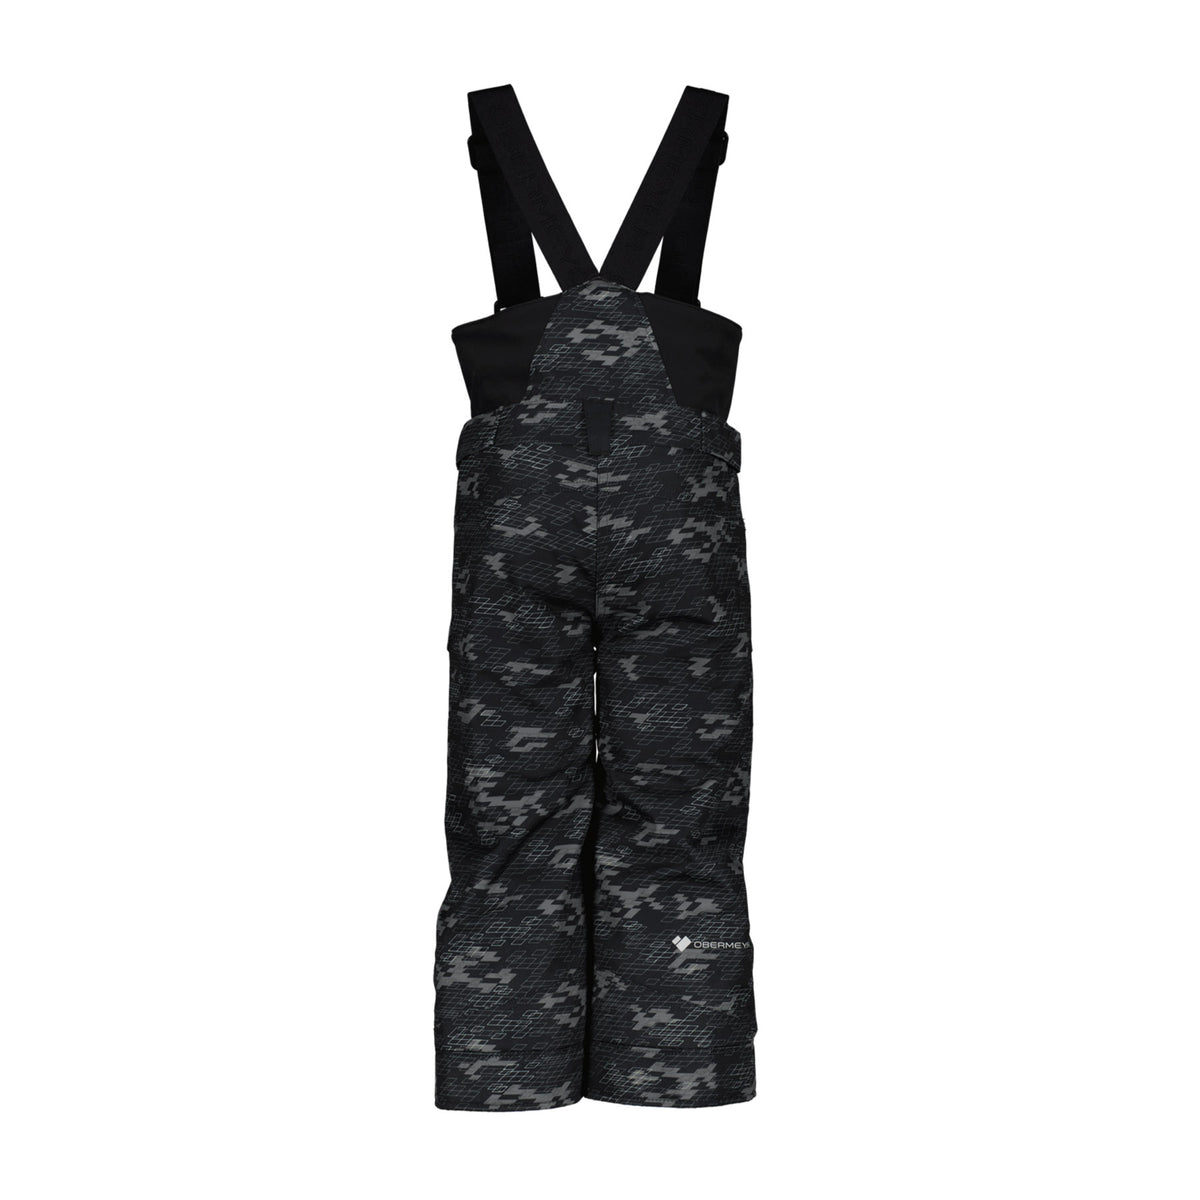 Image features the back of the Obermeyer kids Warp Pant in black camo.